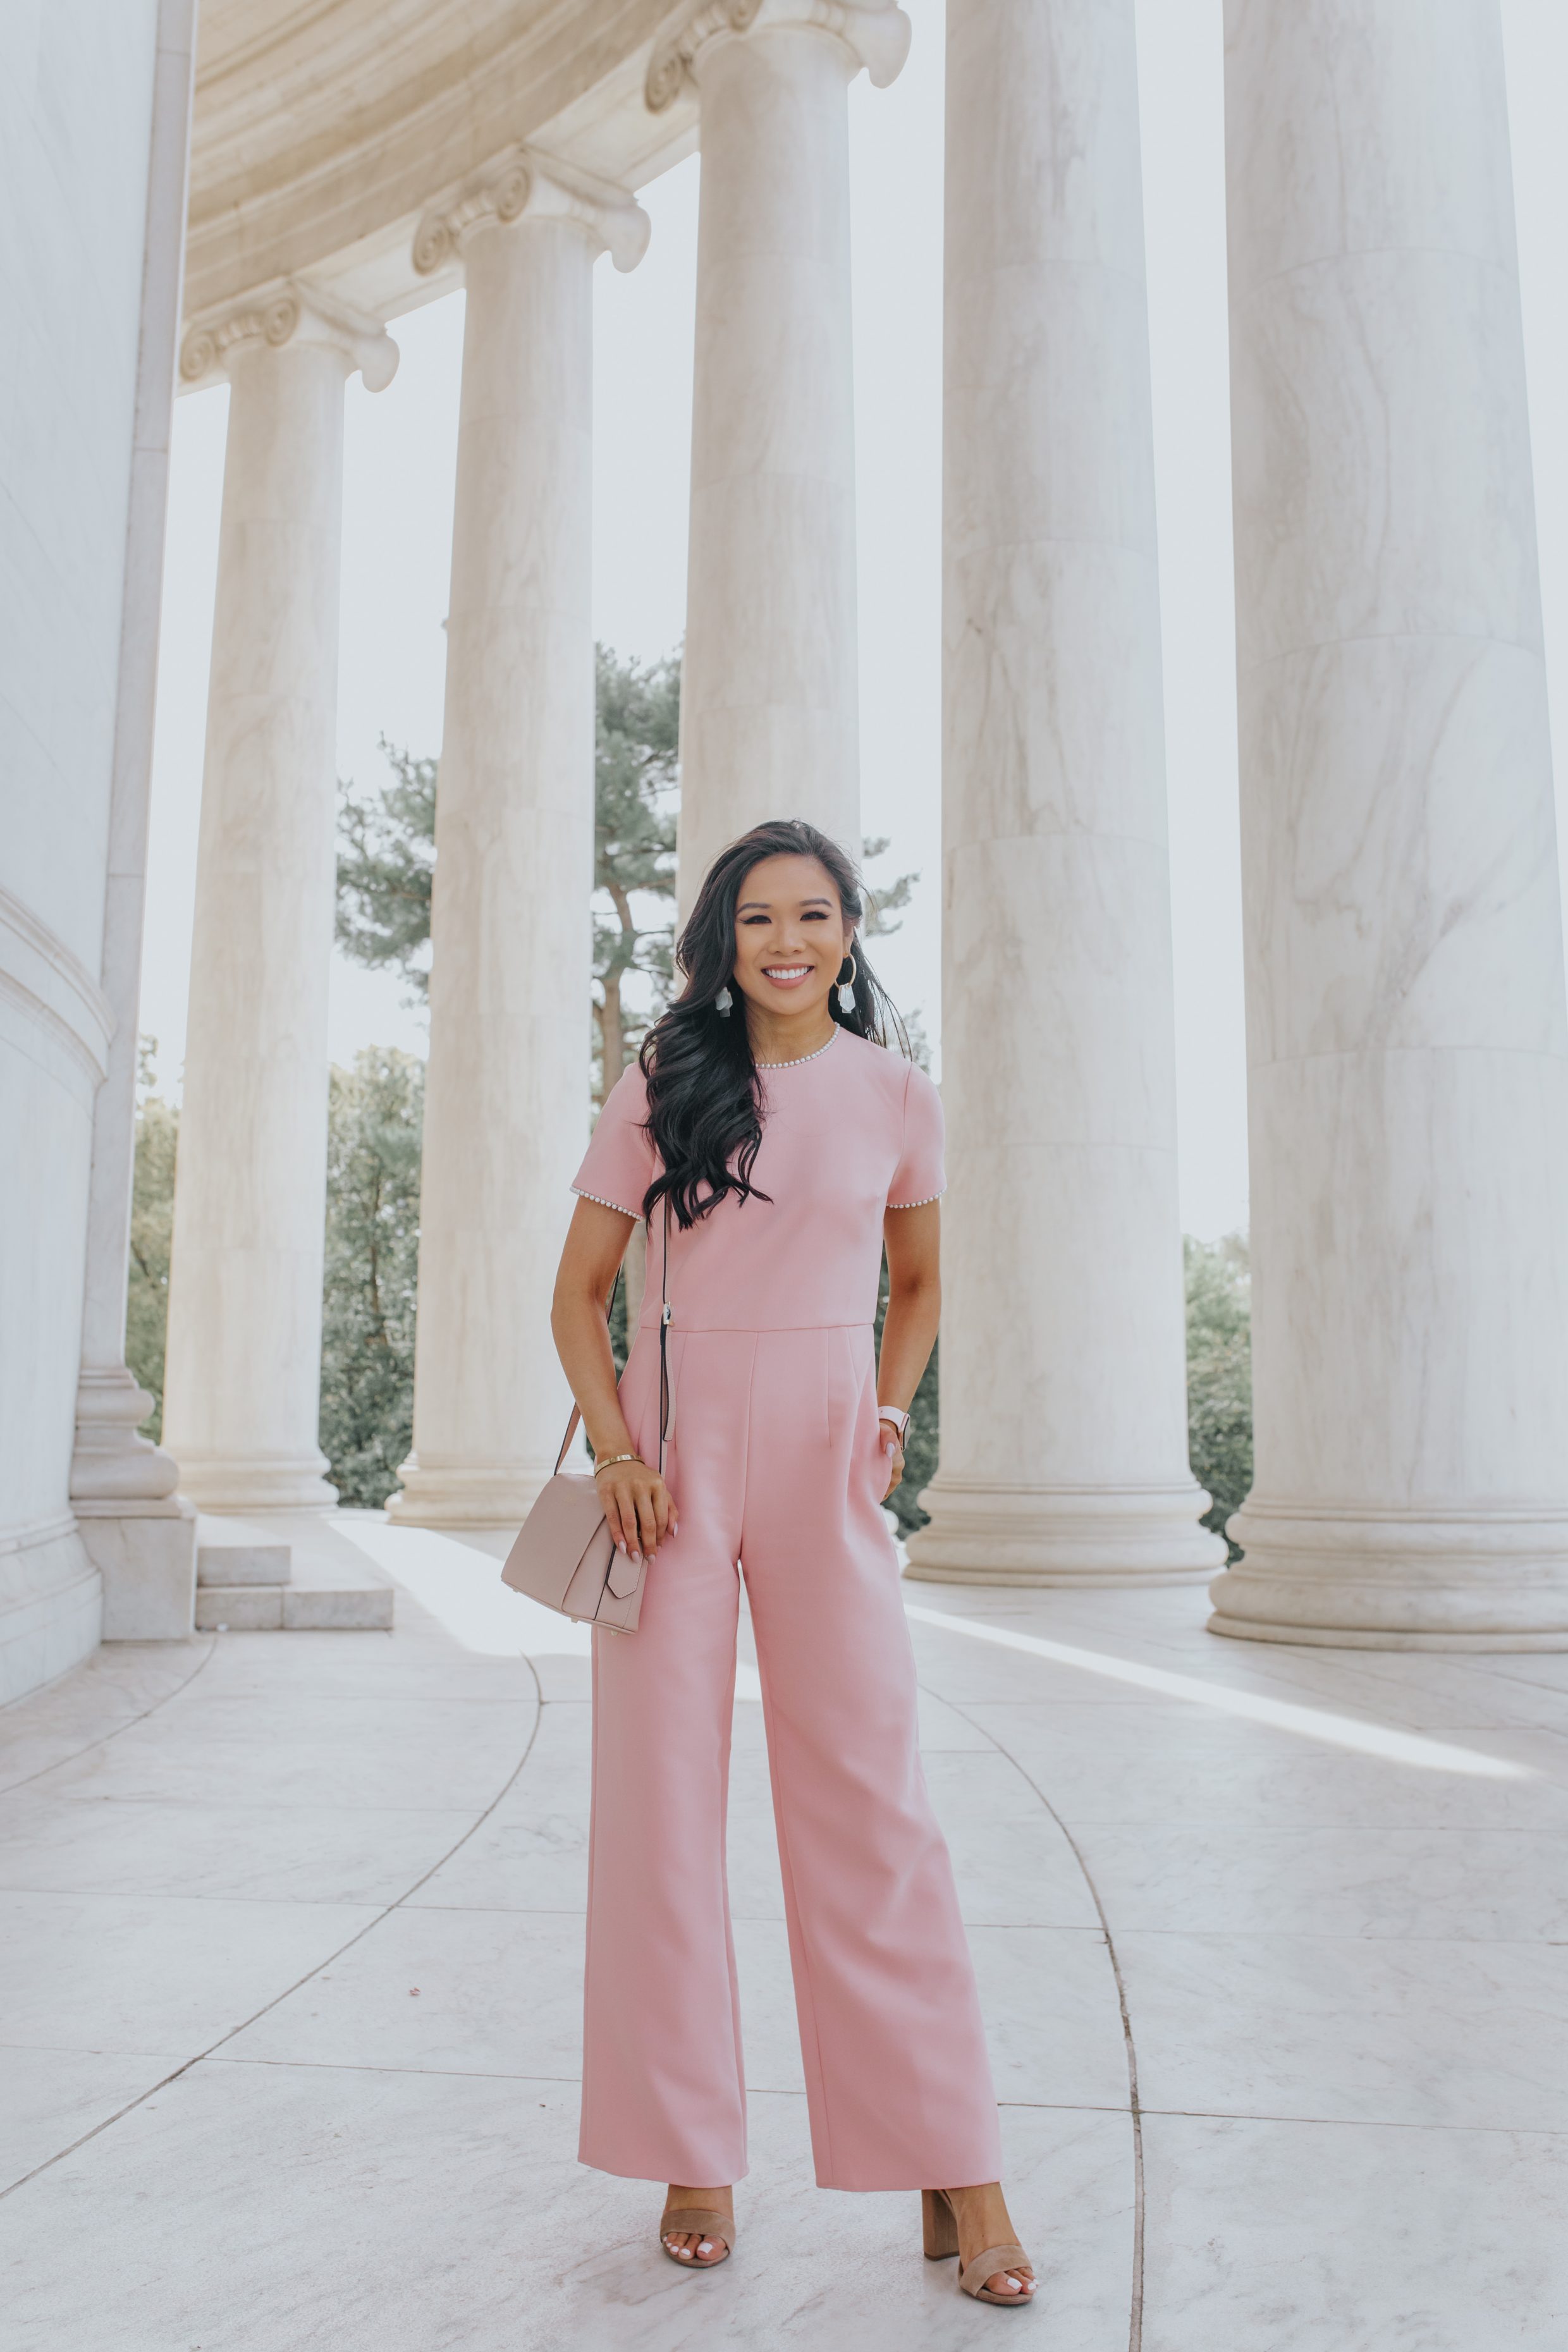 Blogger Hoang-Kim wears a pink pearl trim dressy jumpsuit